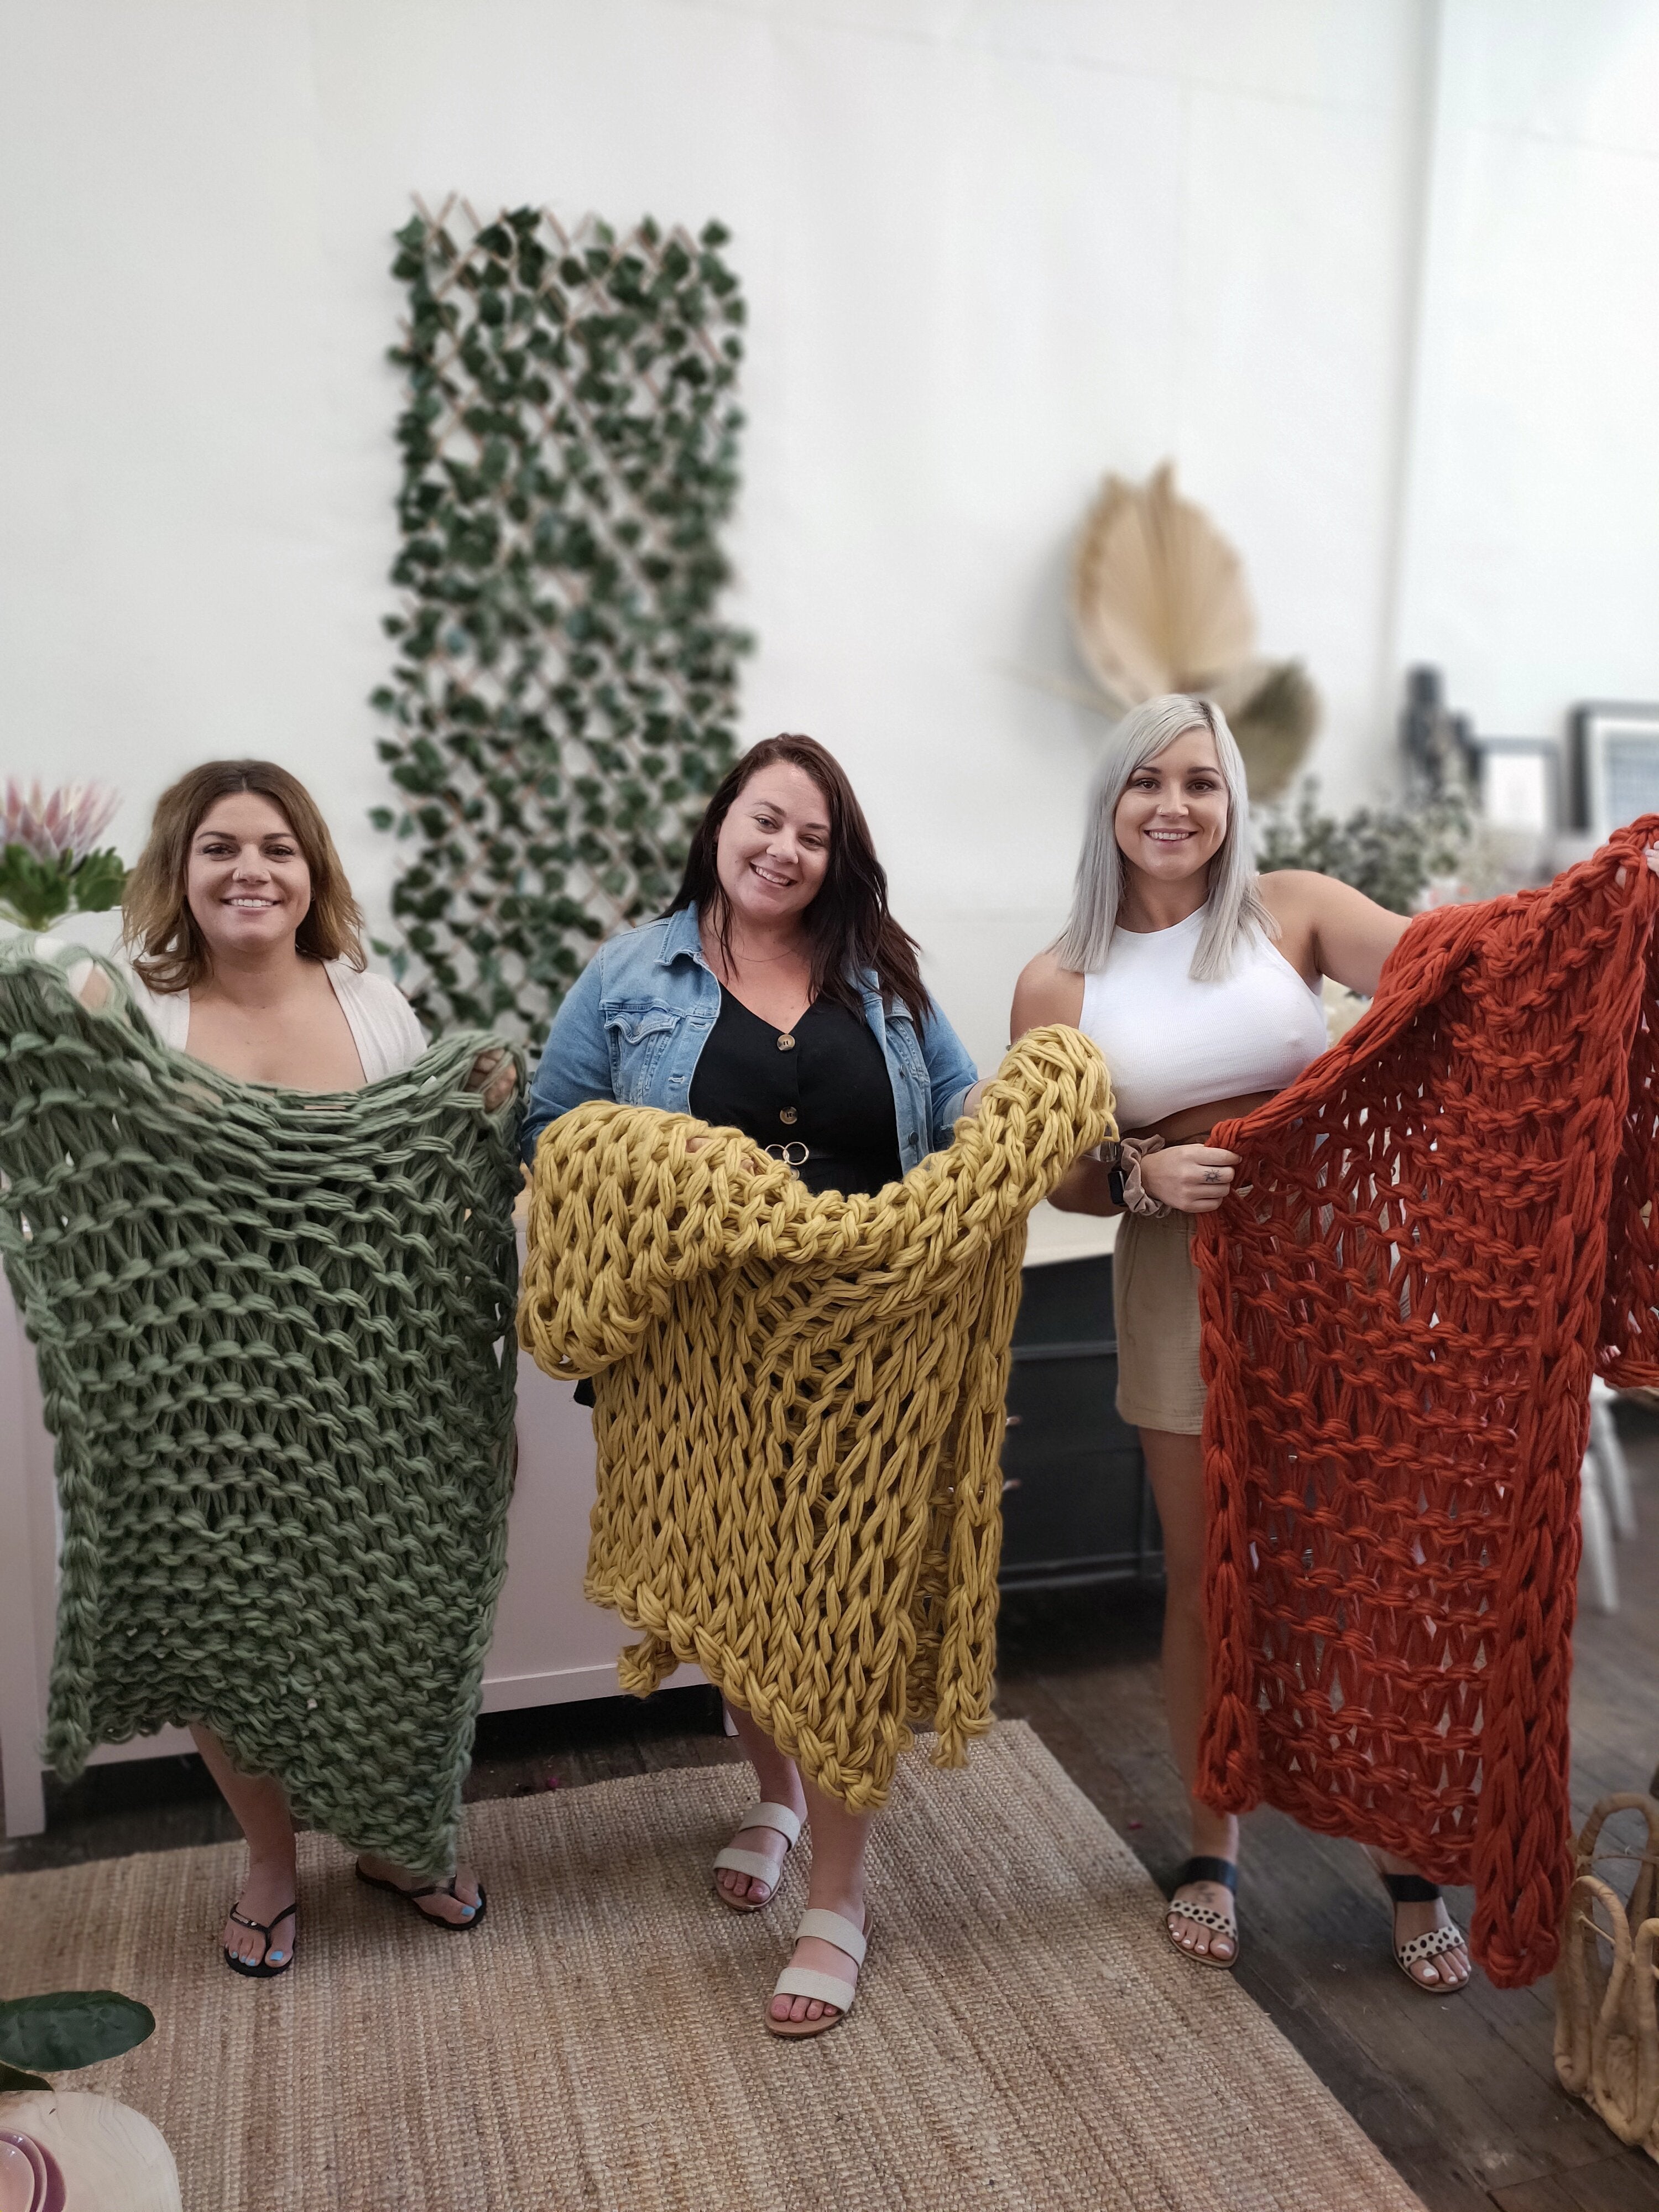 CHUNKY HAND KNITTED THROW WORKSHOP 19th May 12pm Central Coast, NSW